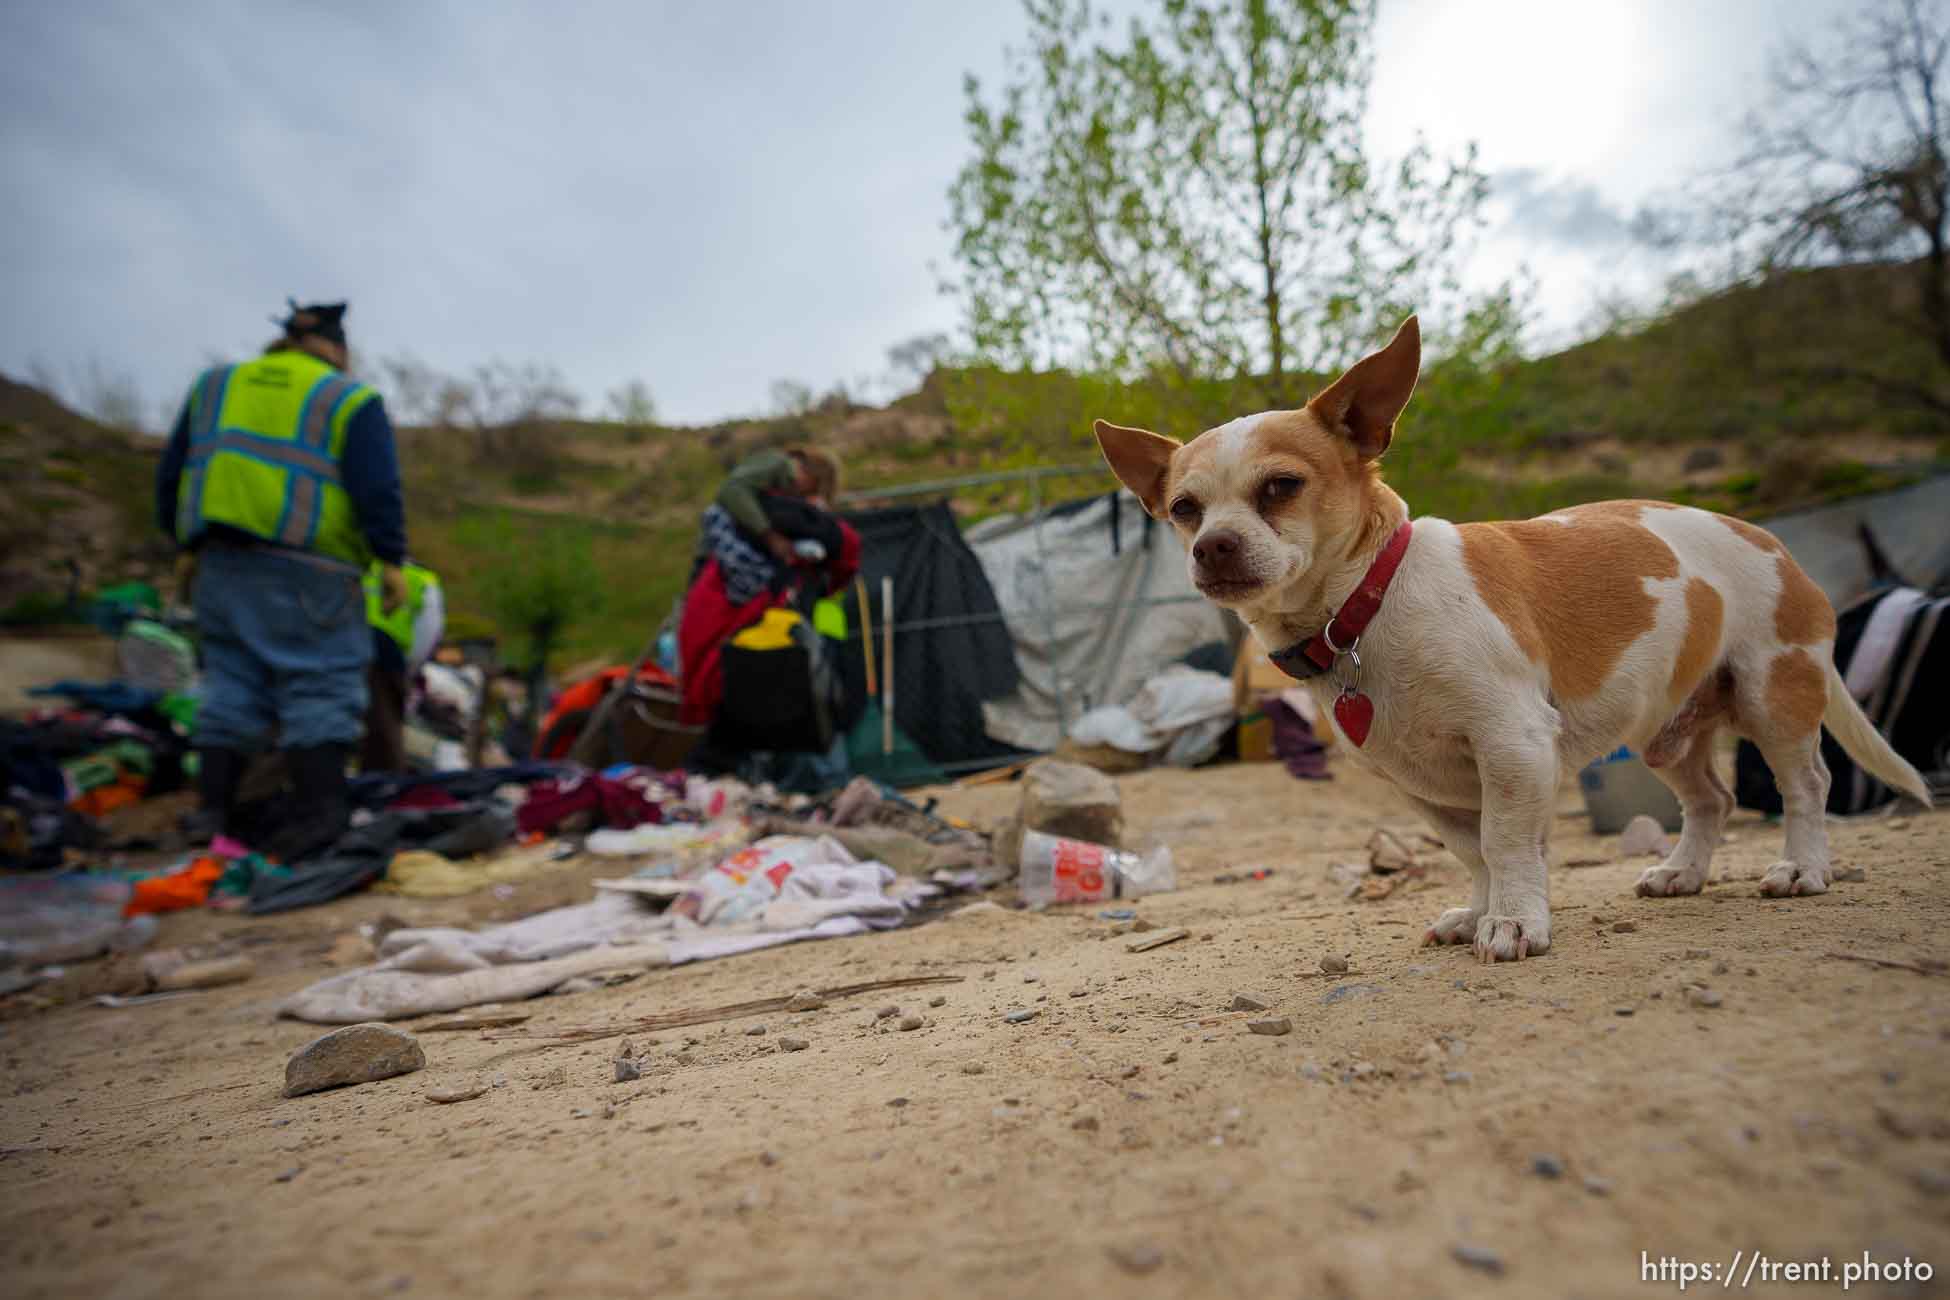 (Trent Nelson  |  The Salt Lake Tribune) A dog looks on as camps are cleared east of Victory Road in the foothills north of Salt Lake City on Wednesday, April 27, 2022.